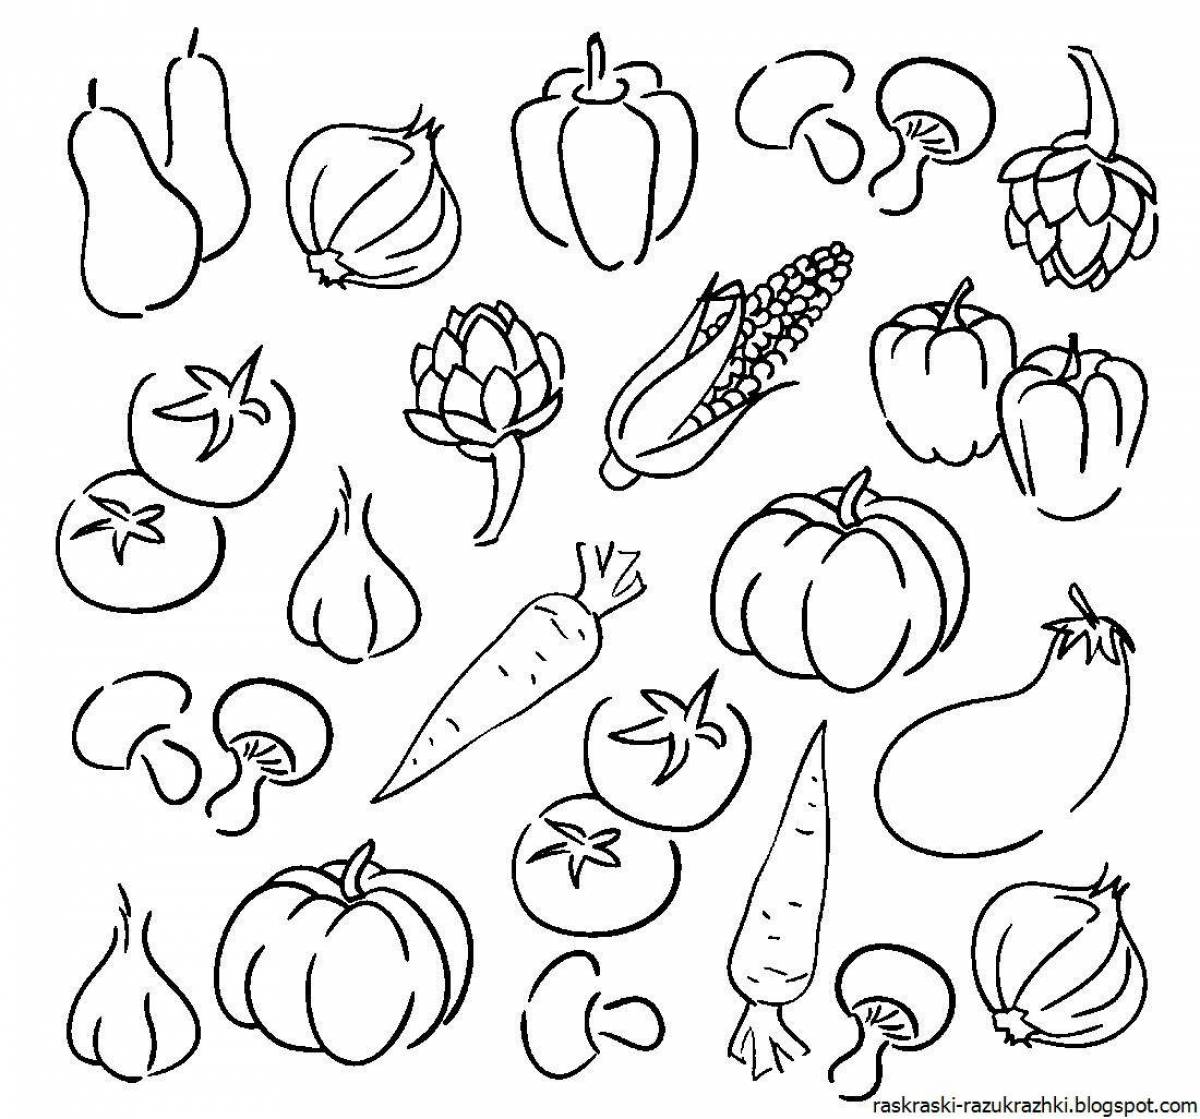 Glorious fruits and vegetables coloring pages for kids